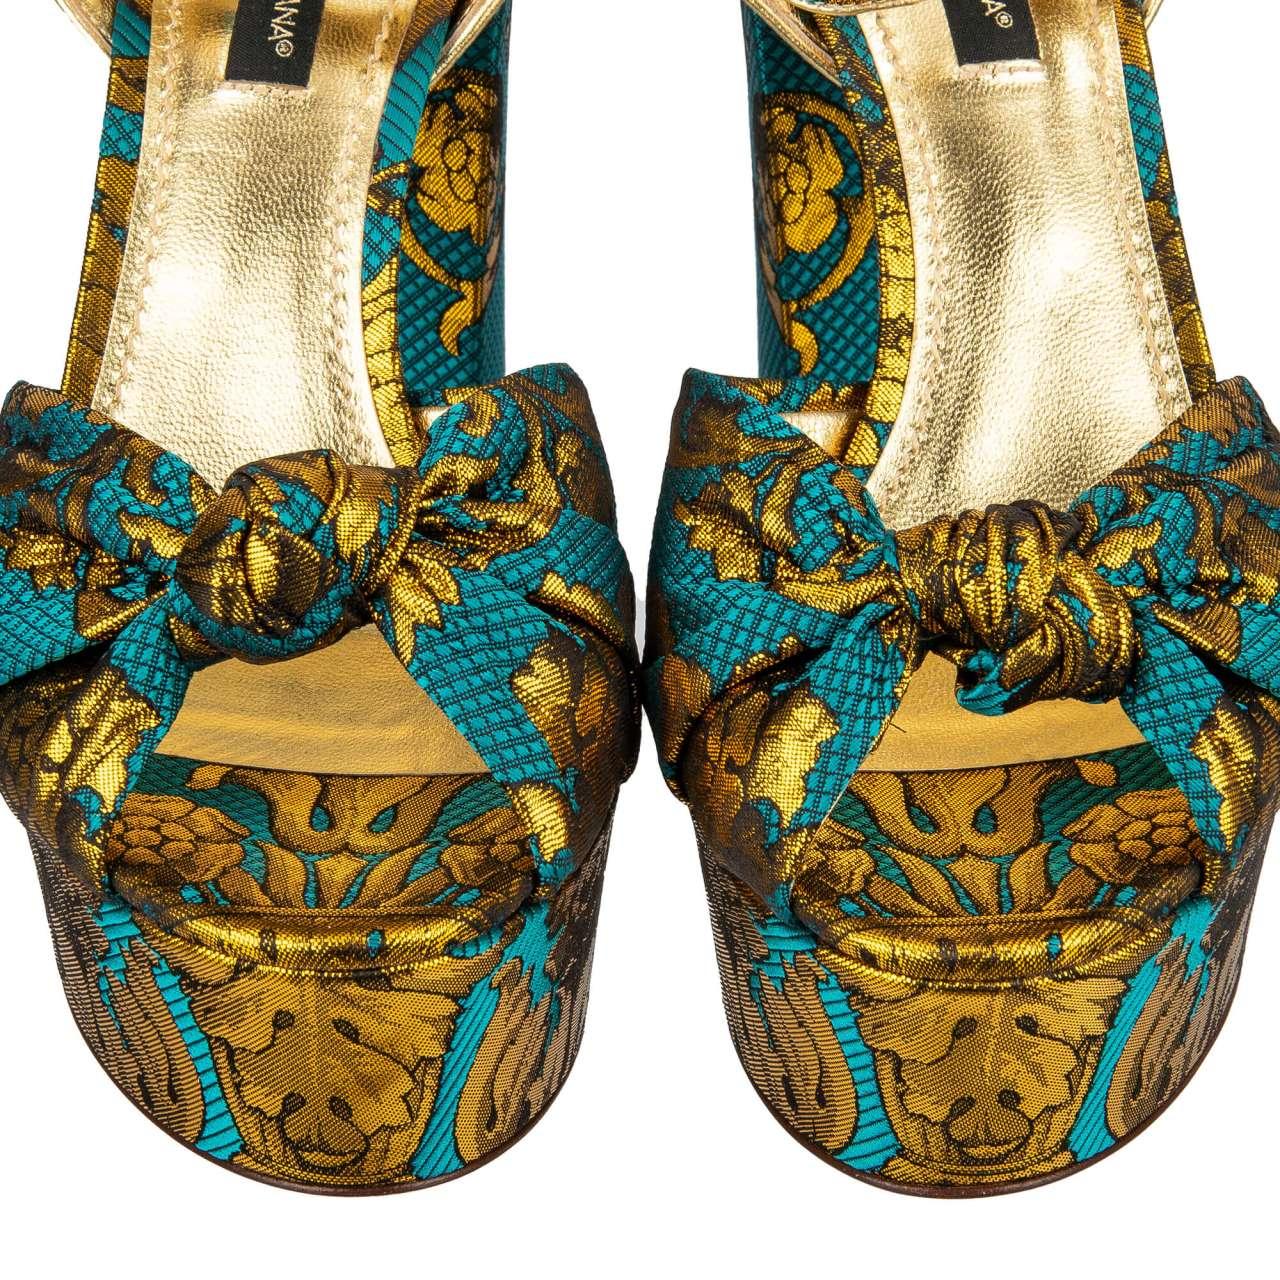 - Baroque Jacquard Plateau Leather Sandals KEIRA with crystal buckle in blue and gold by DOLCE & GABBANA - MADE IN ITALY - RUNWAY - Dolce & Gabbana Fashion Show - New with Box - Model: CR0801-AK837-8F587 - Material: 71% Polyester, 29% Lambskin -